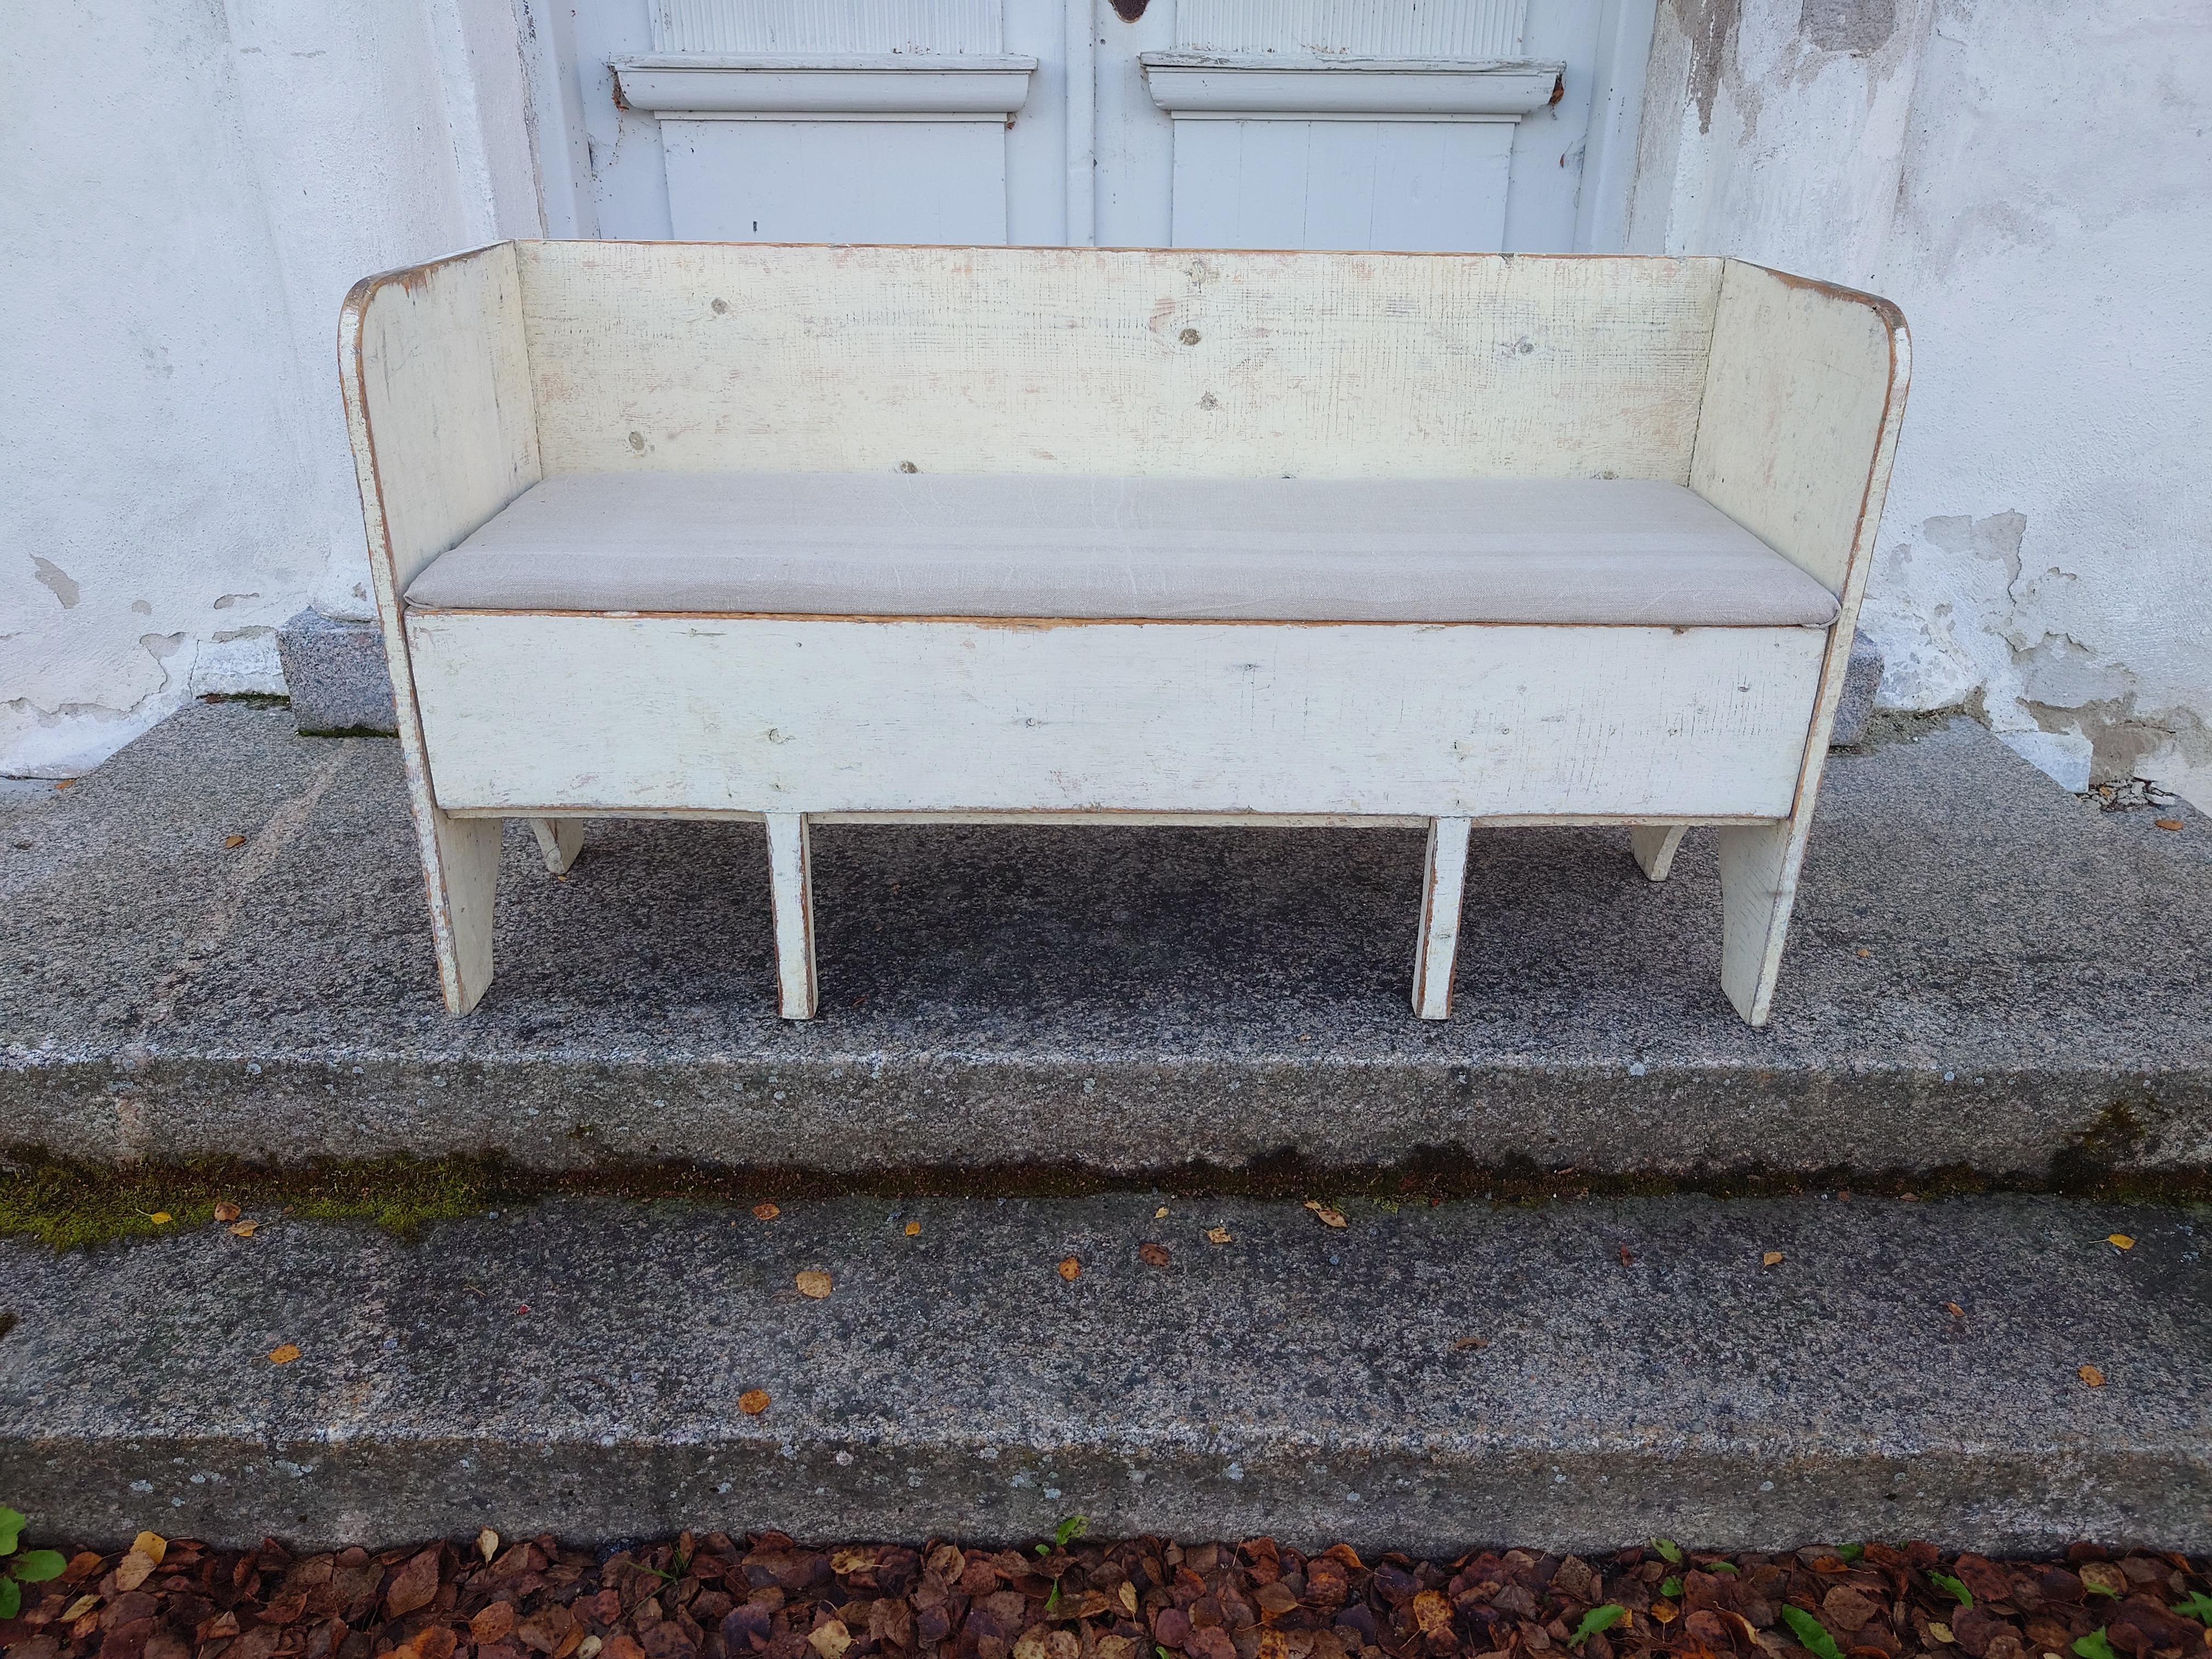  A charming antique sofa from the mid-1800s. The sofa  is from Boden Norrbotten, Northern Sweden It's petite and compact, perfect for smaller spaces. 
The sofa has a foldable lid that provides convenient storage. It's also extendable, making it